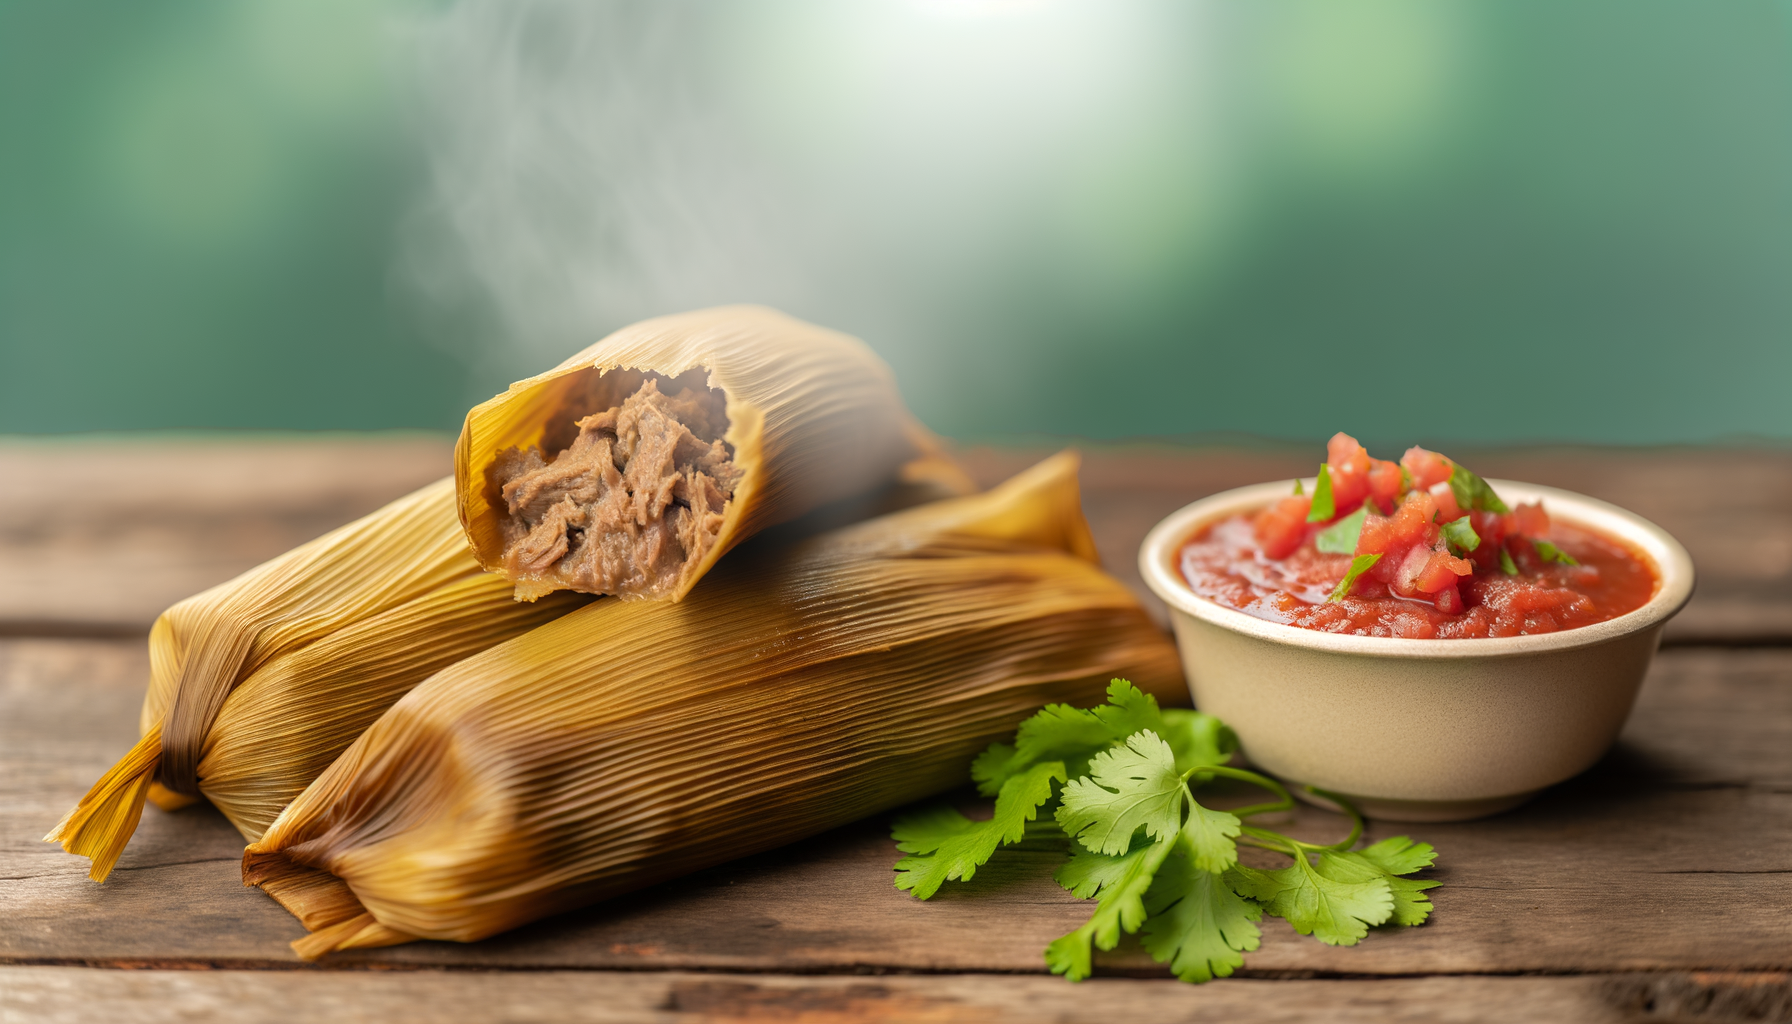 Traditional beef tamales, wrapped in corn husks, with seasoned beef peeking, on a wooden table beside homemade salsa.